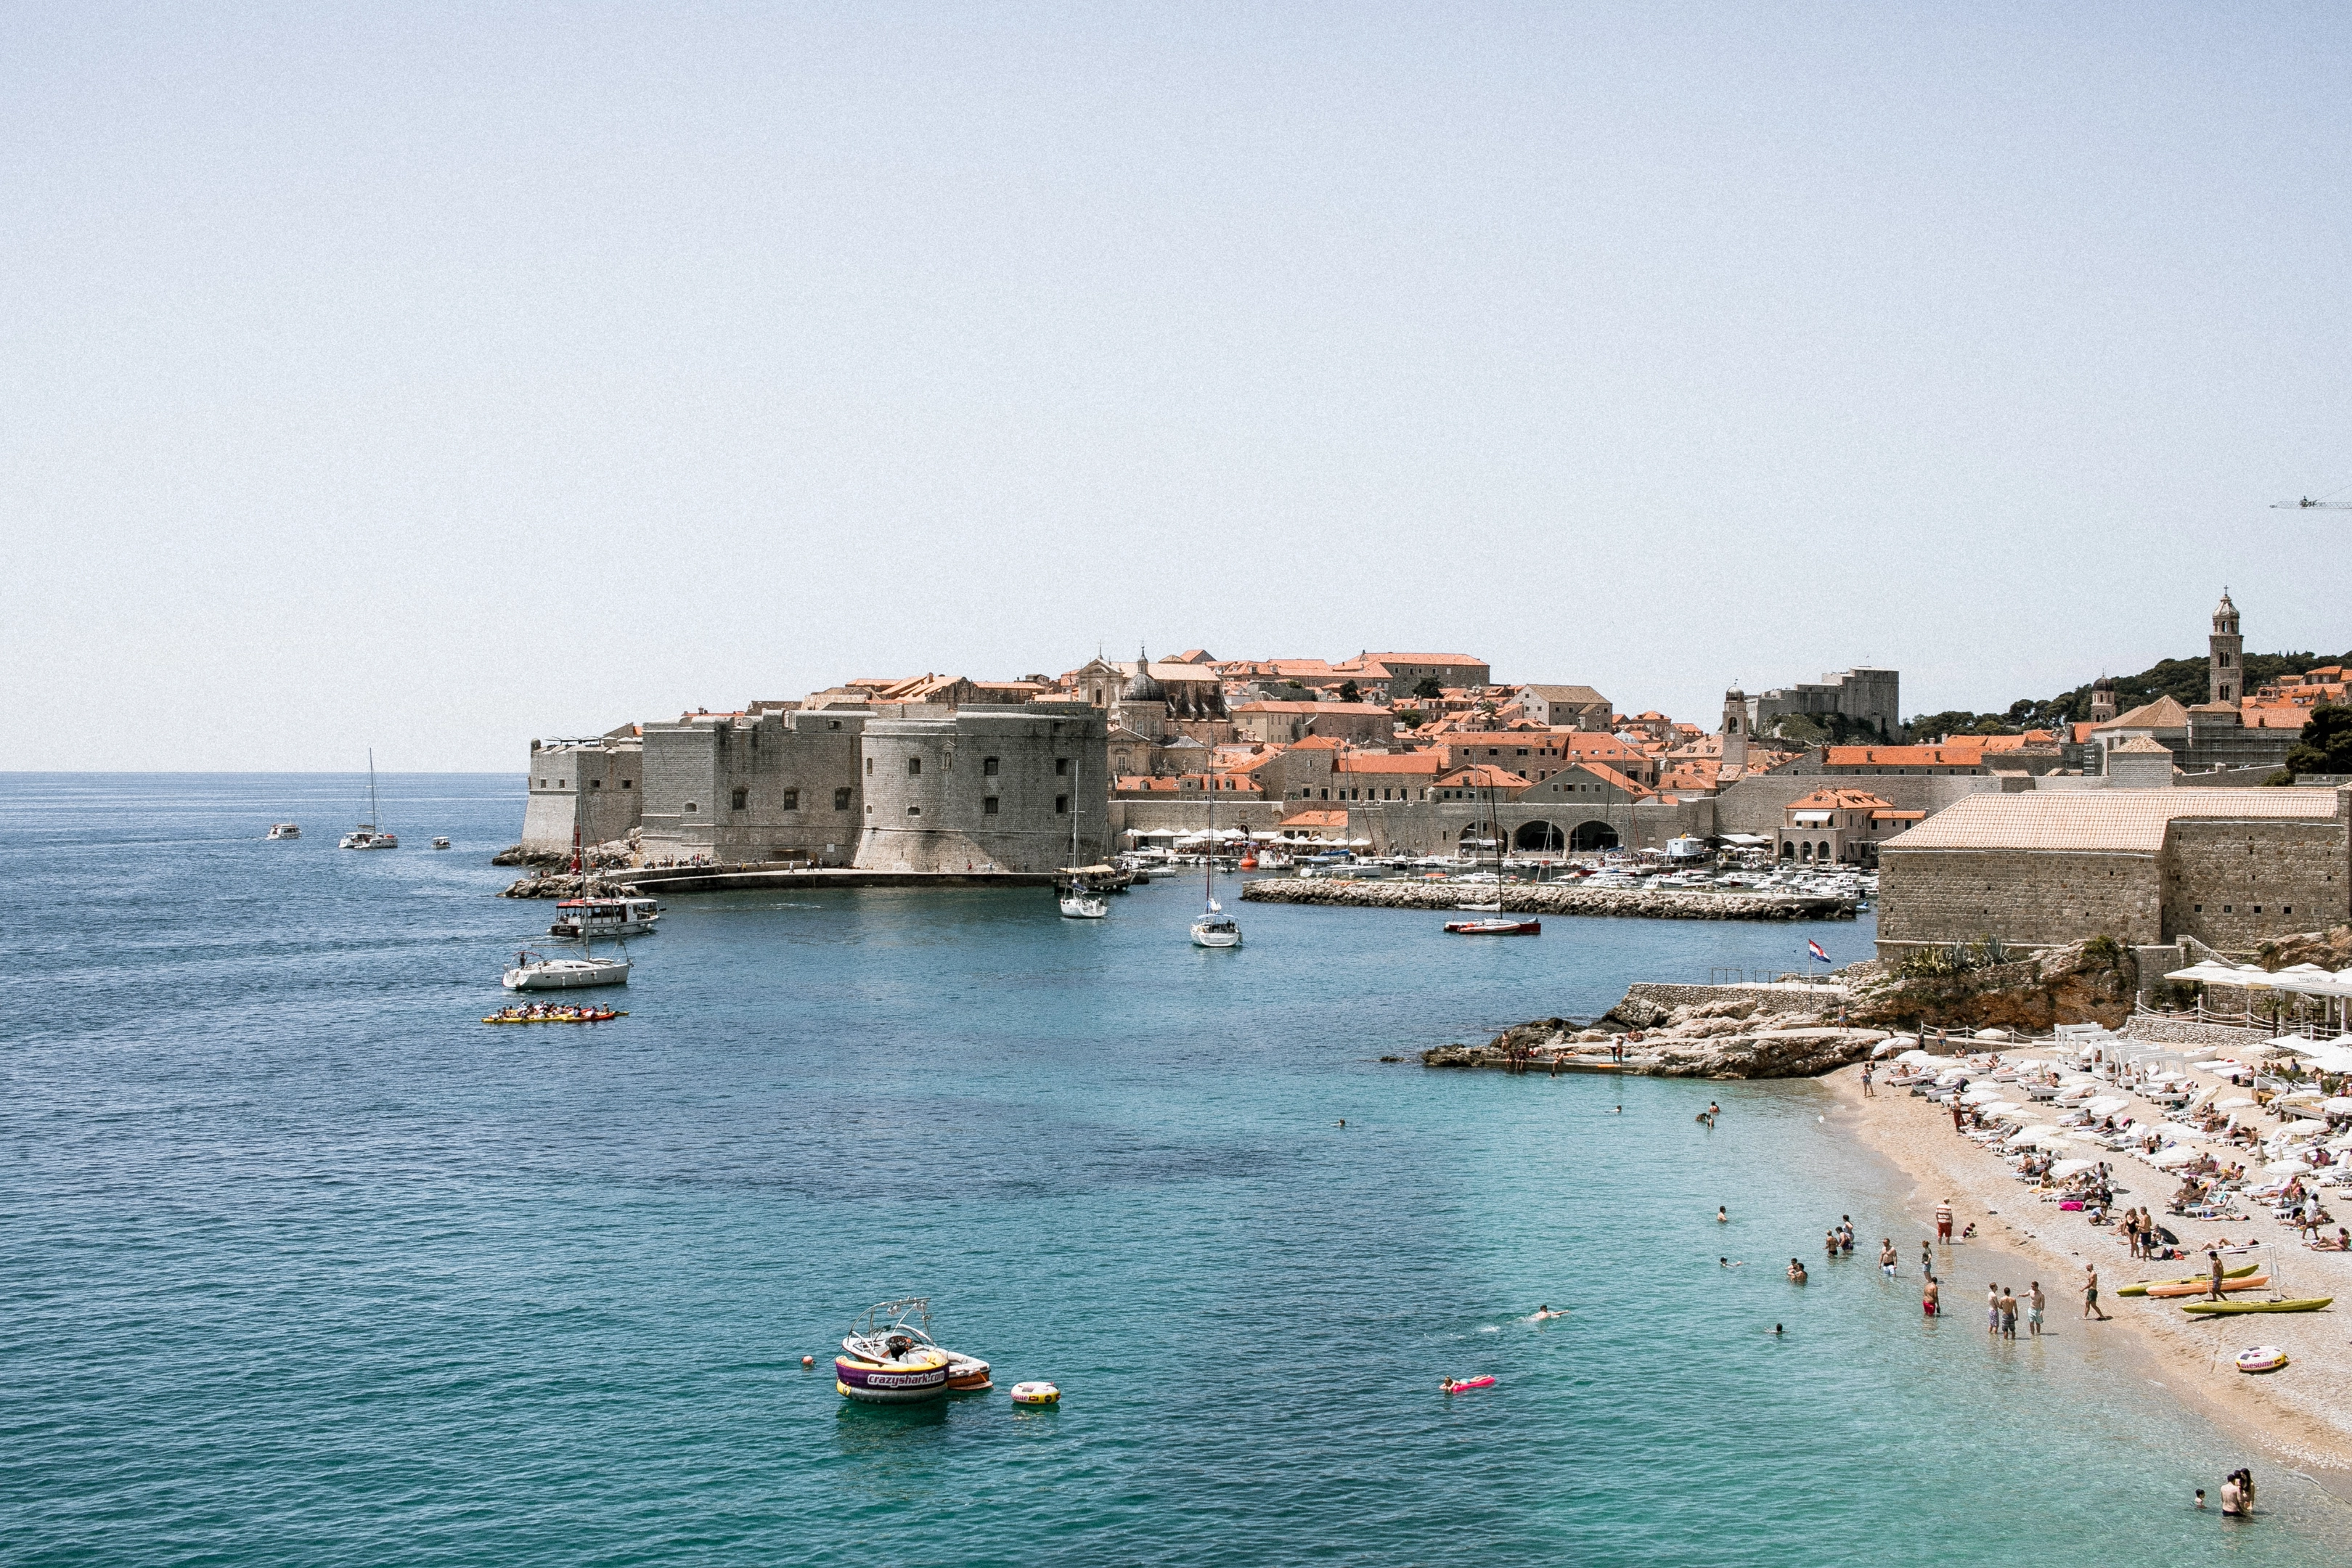 Capture your memories with a photoshoot in Croatia